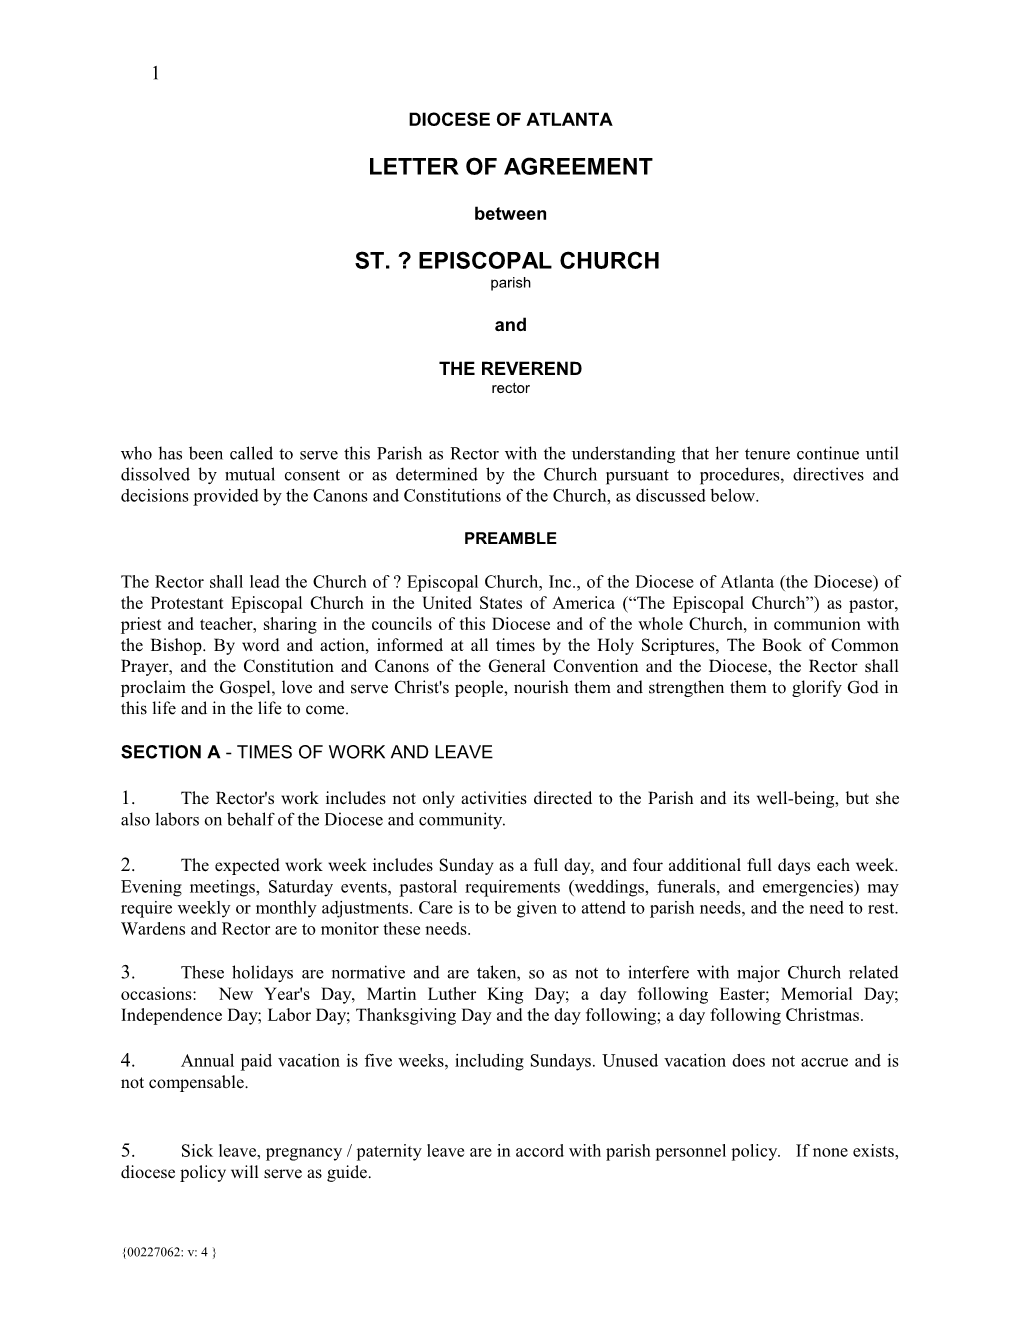 Letter of Agreement - Diocese of Atlanta Template